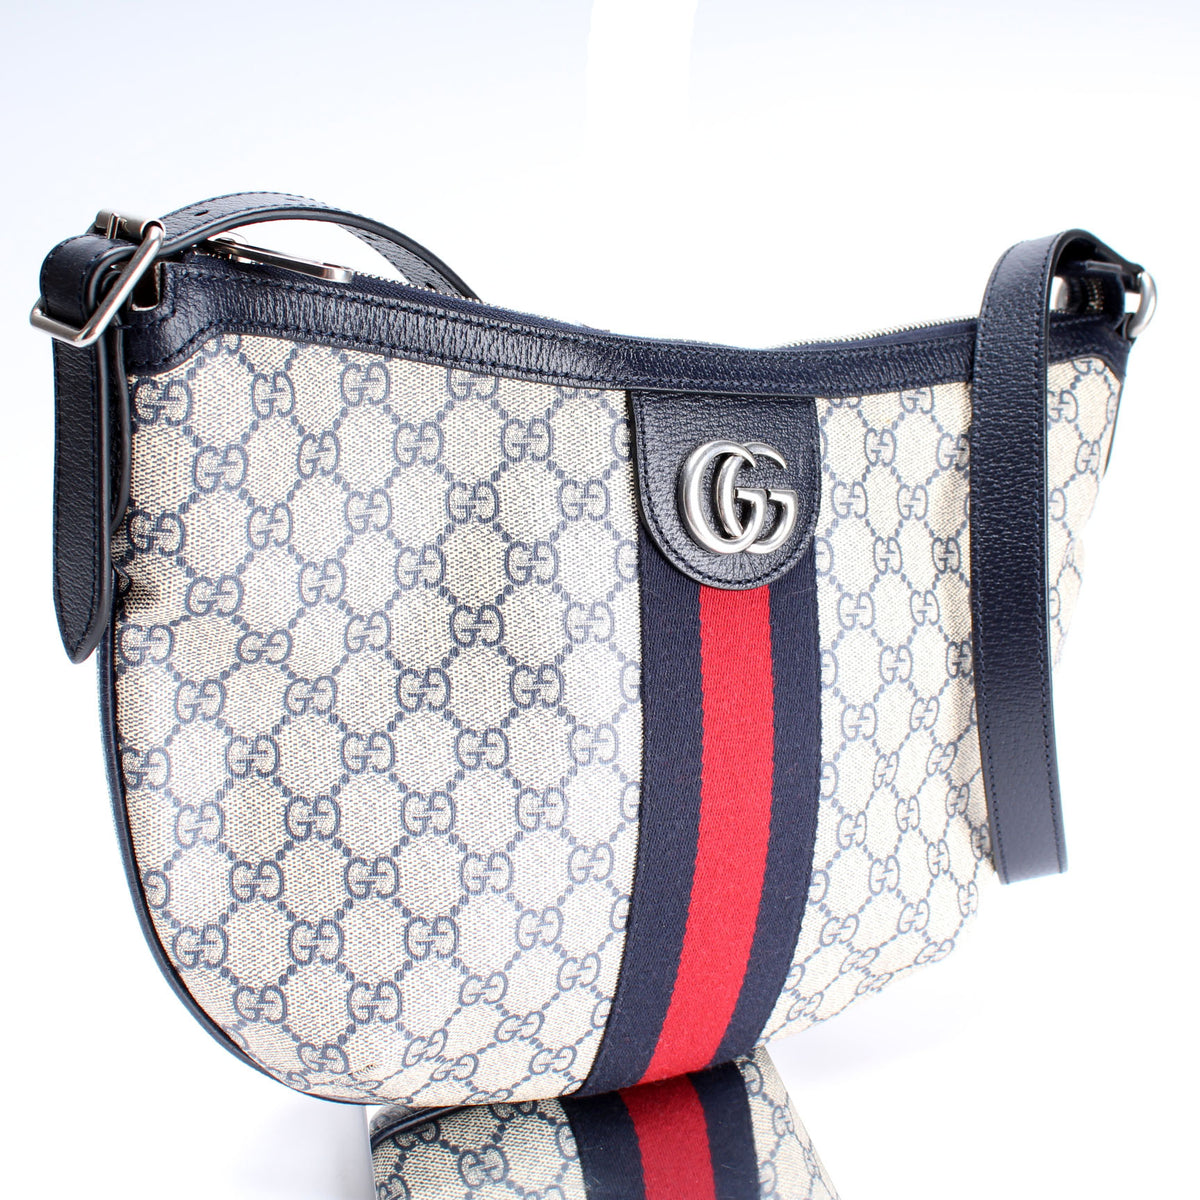 Shop GUCCI Ophidia GG small shoulder bag (598125 UULAT 9682) by N